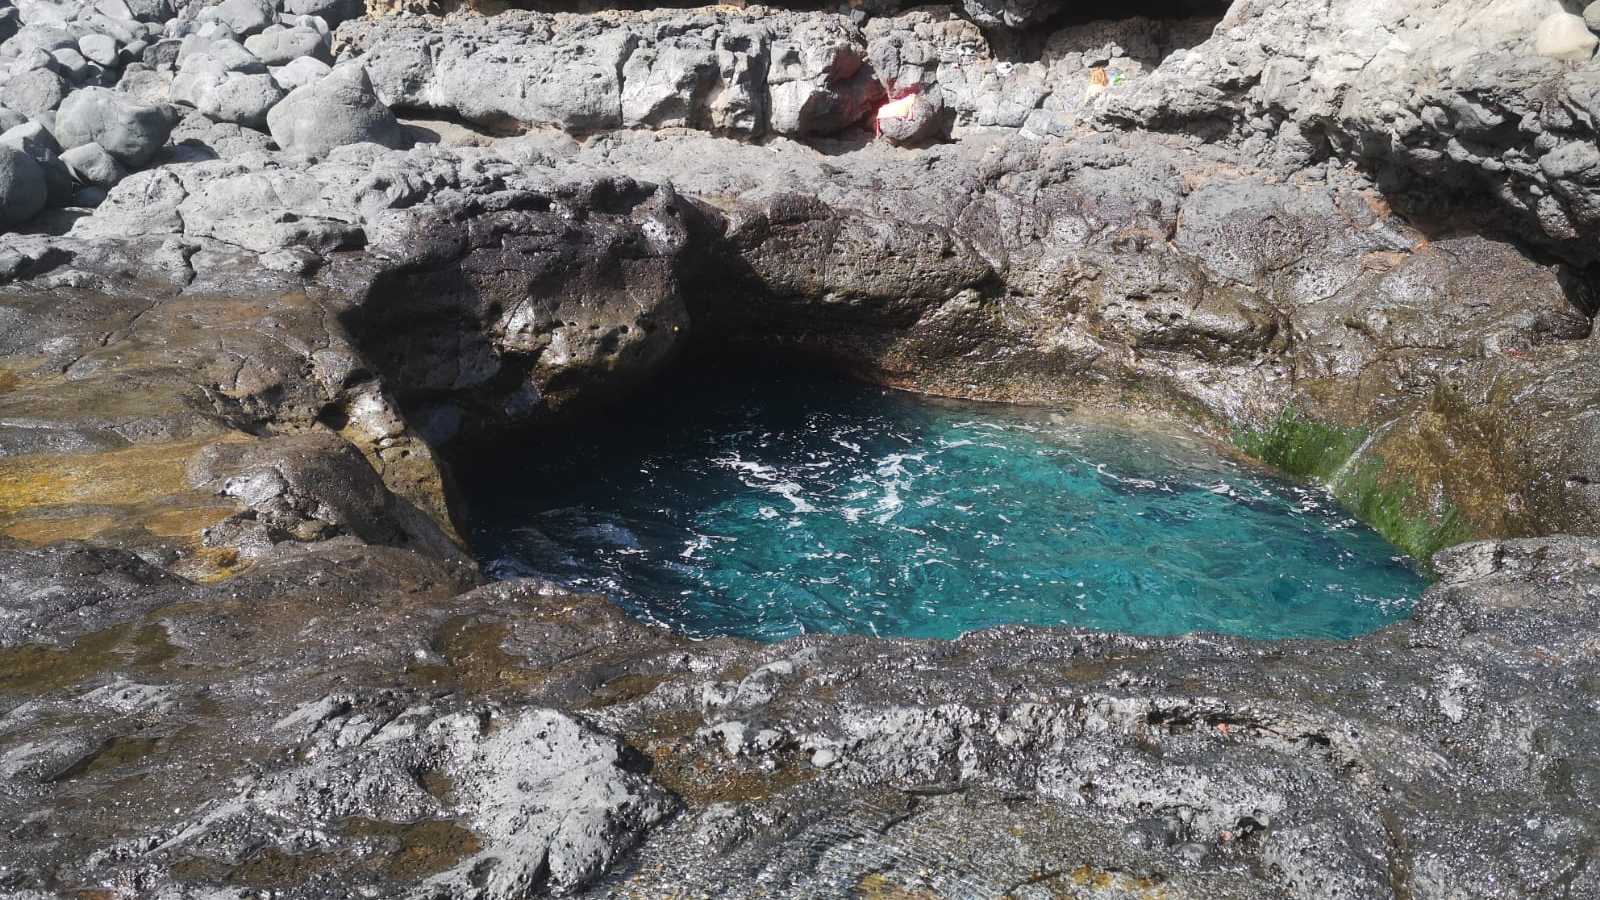 Typical natural pool or "puddle" on the north coast of Tenerife